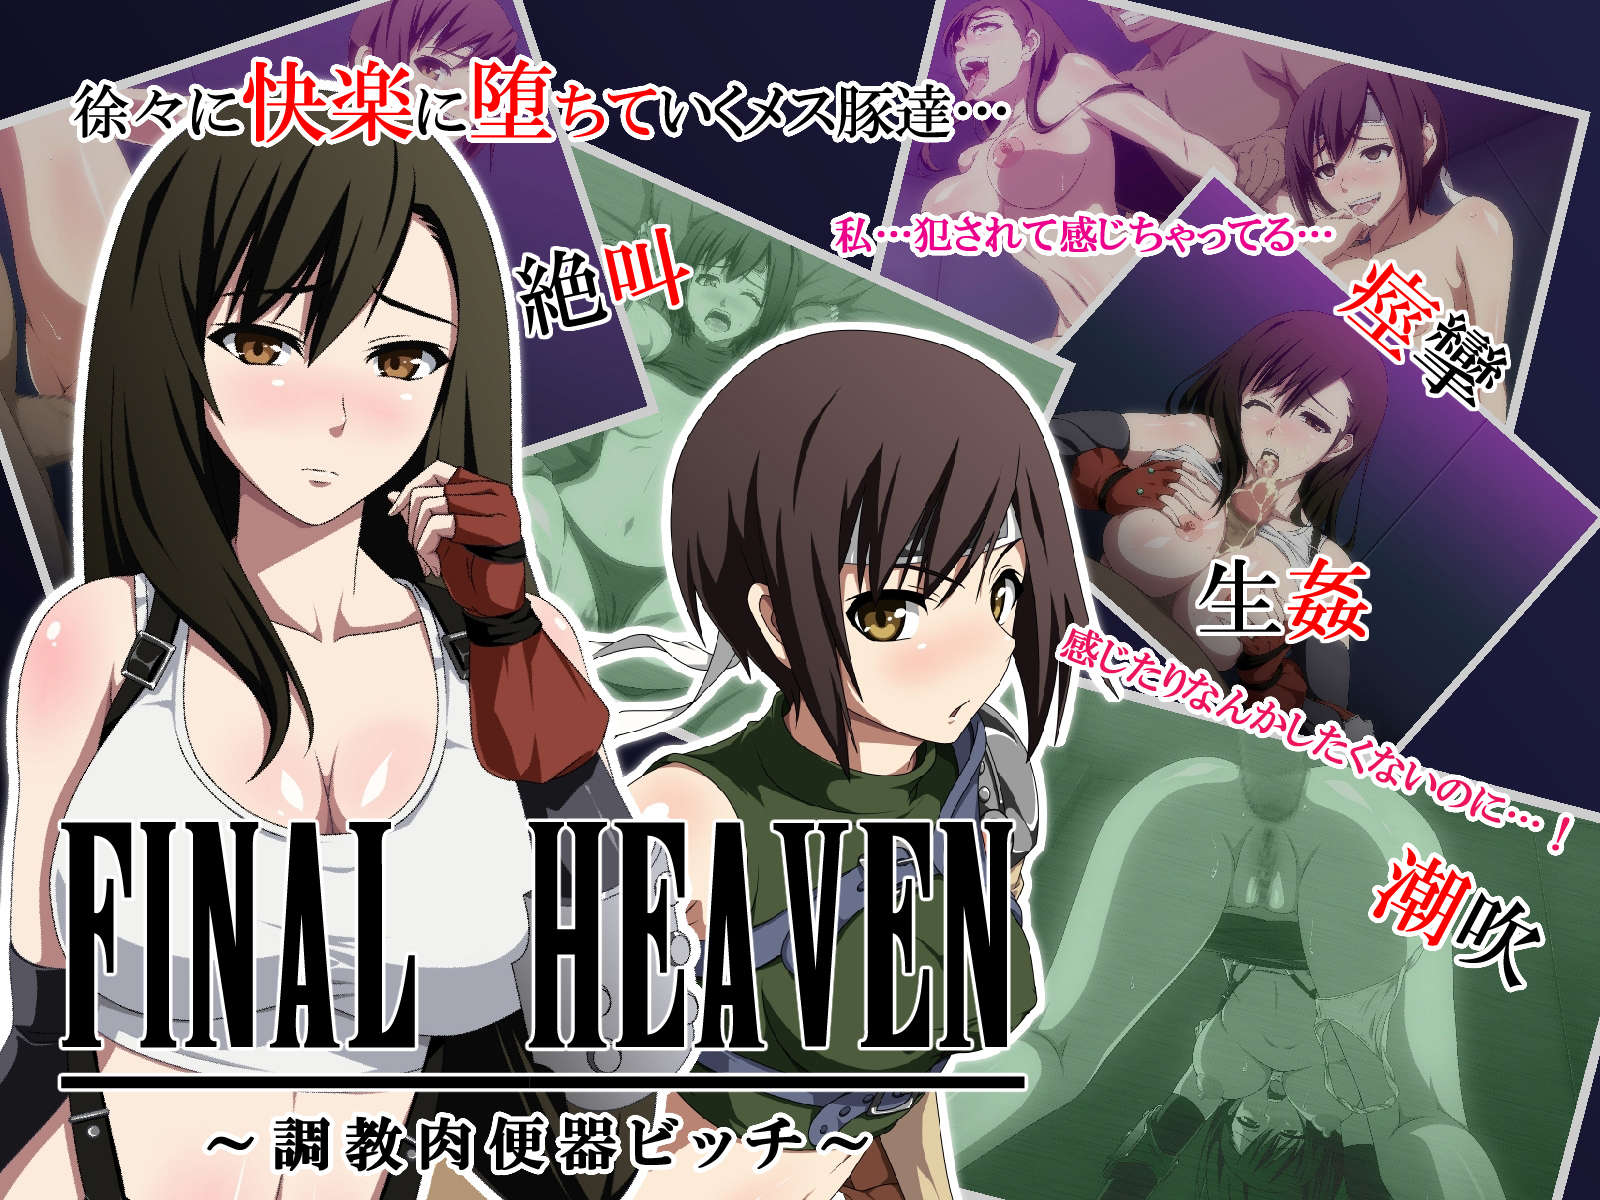 Final Heaven – Training Meat Toilet Bitches